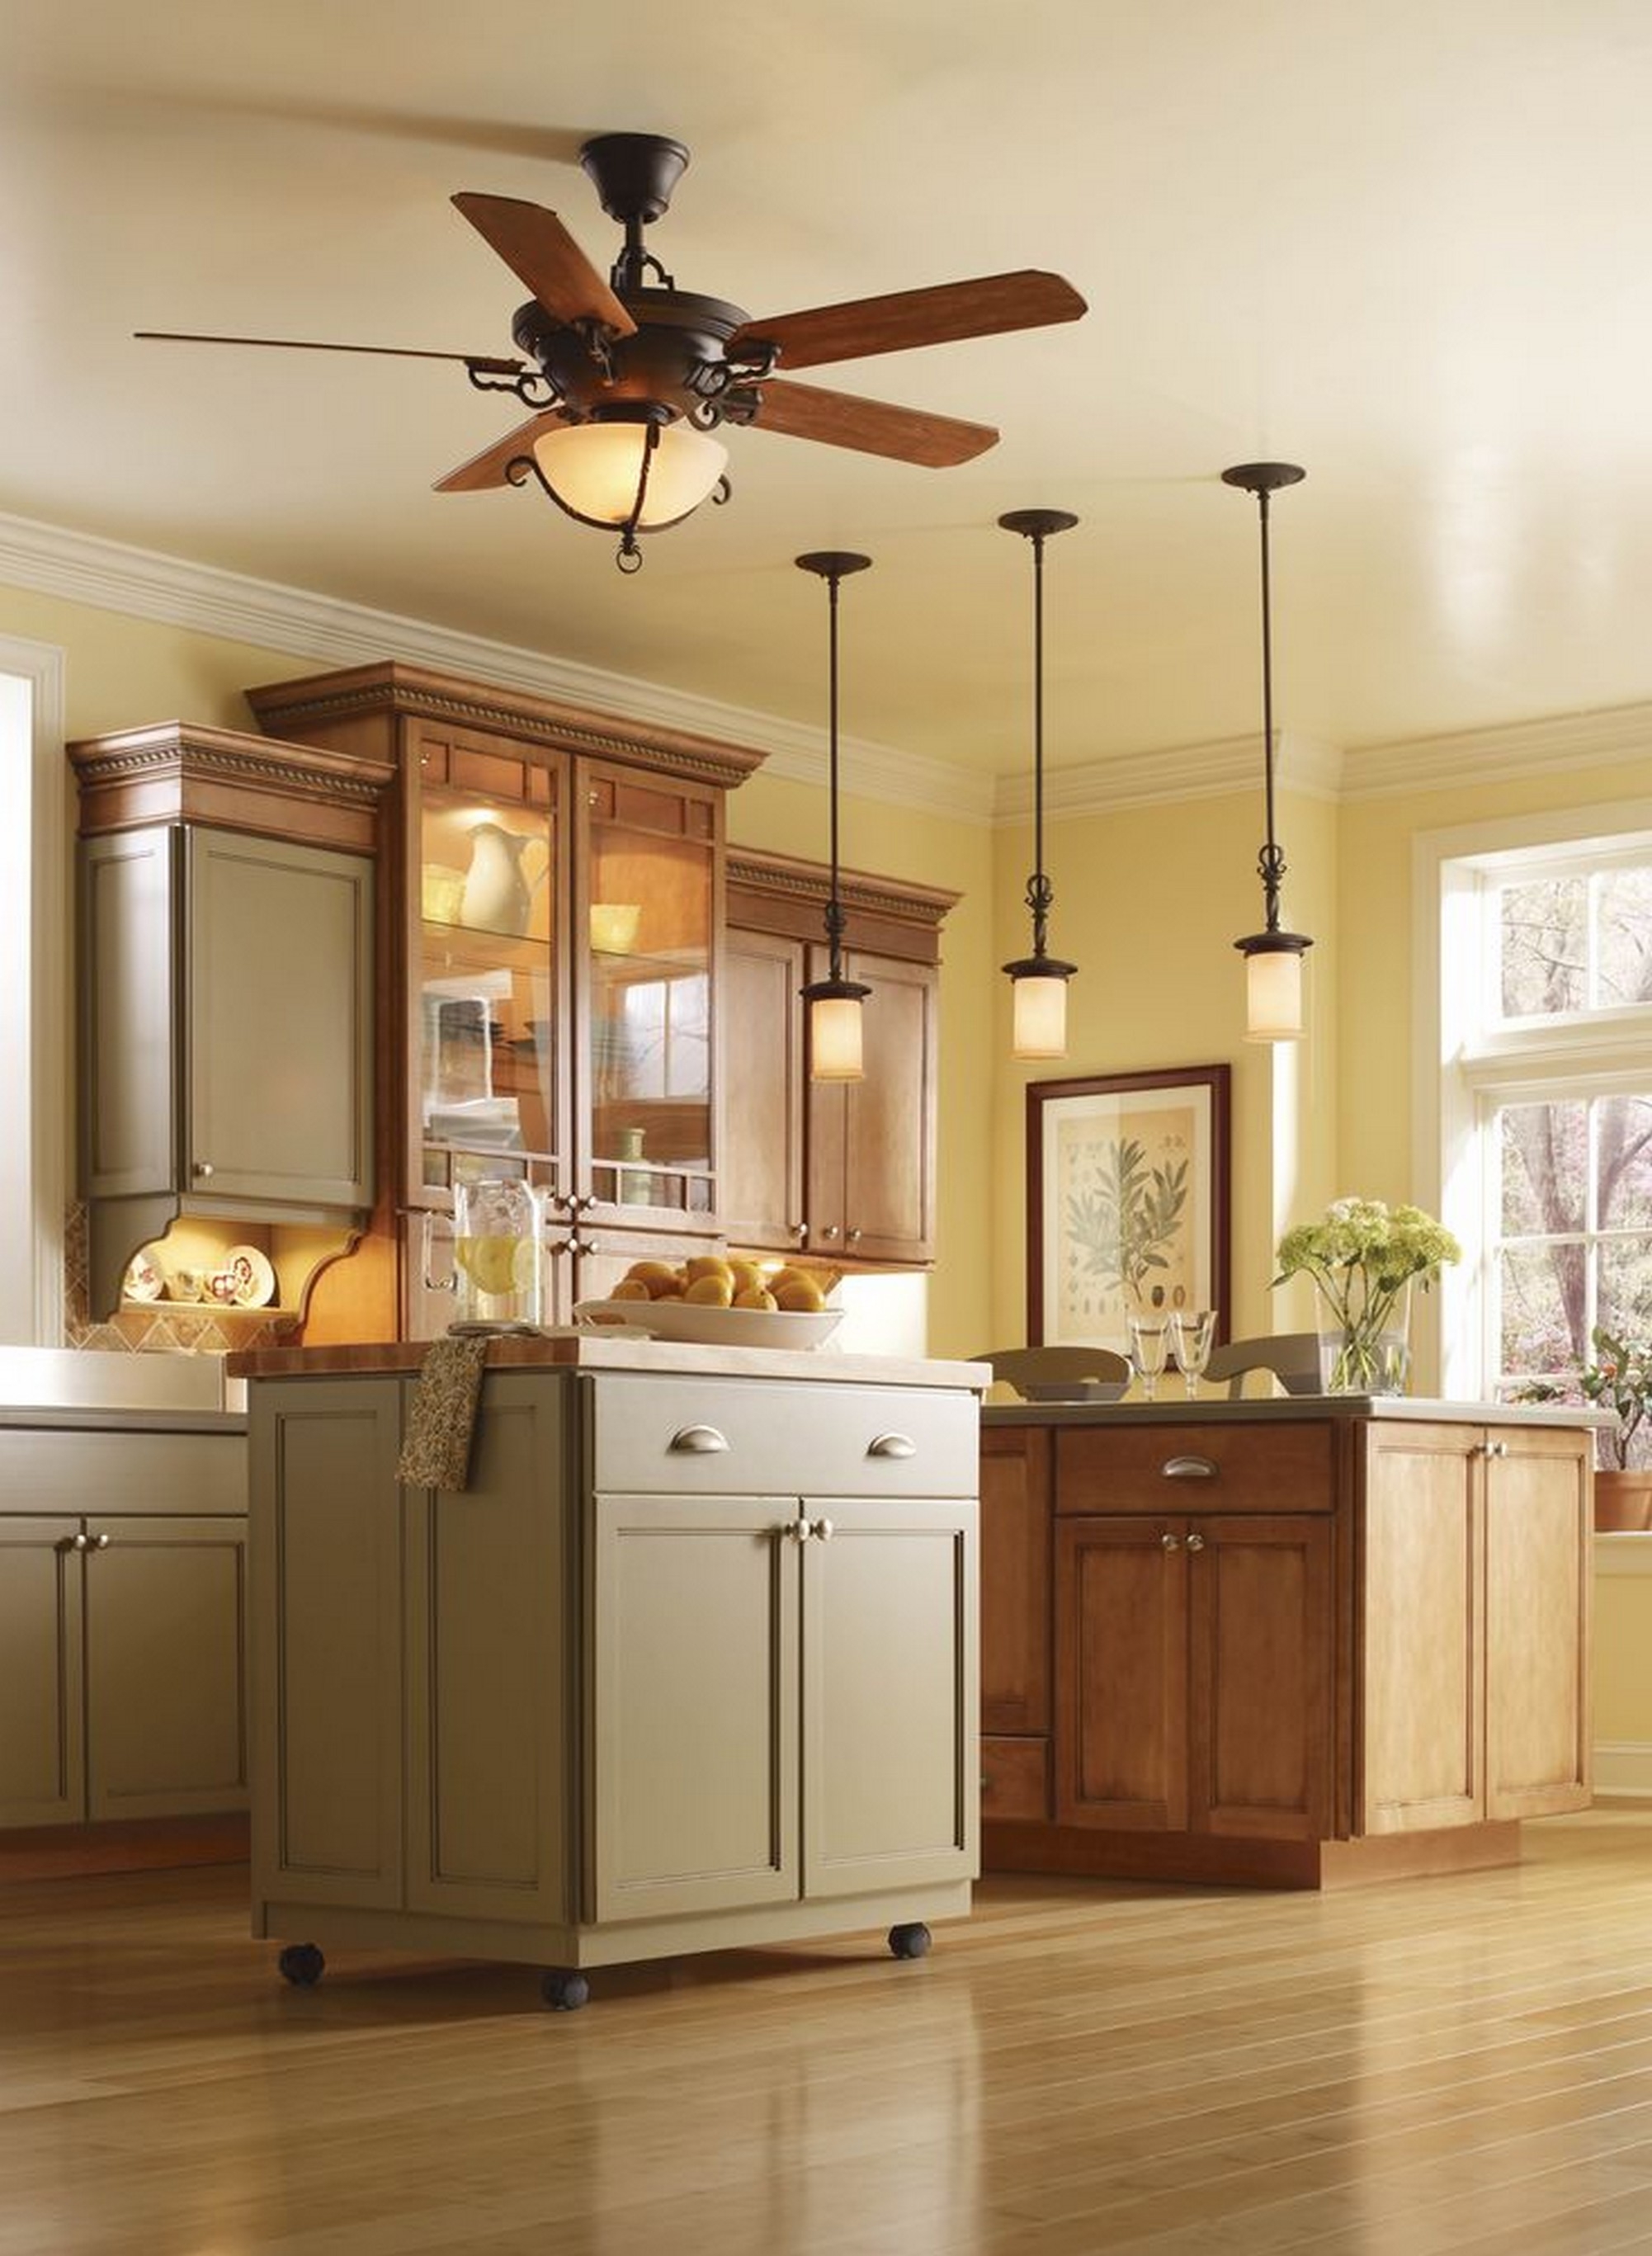 Permalink to Ceiling Fans With Lights Kitchen